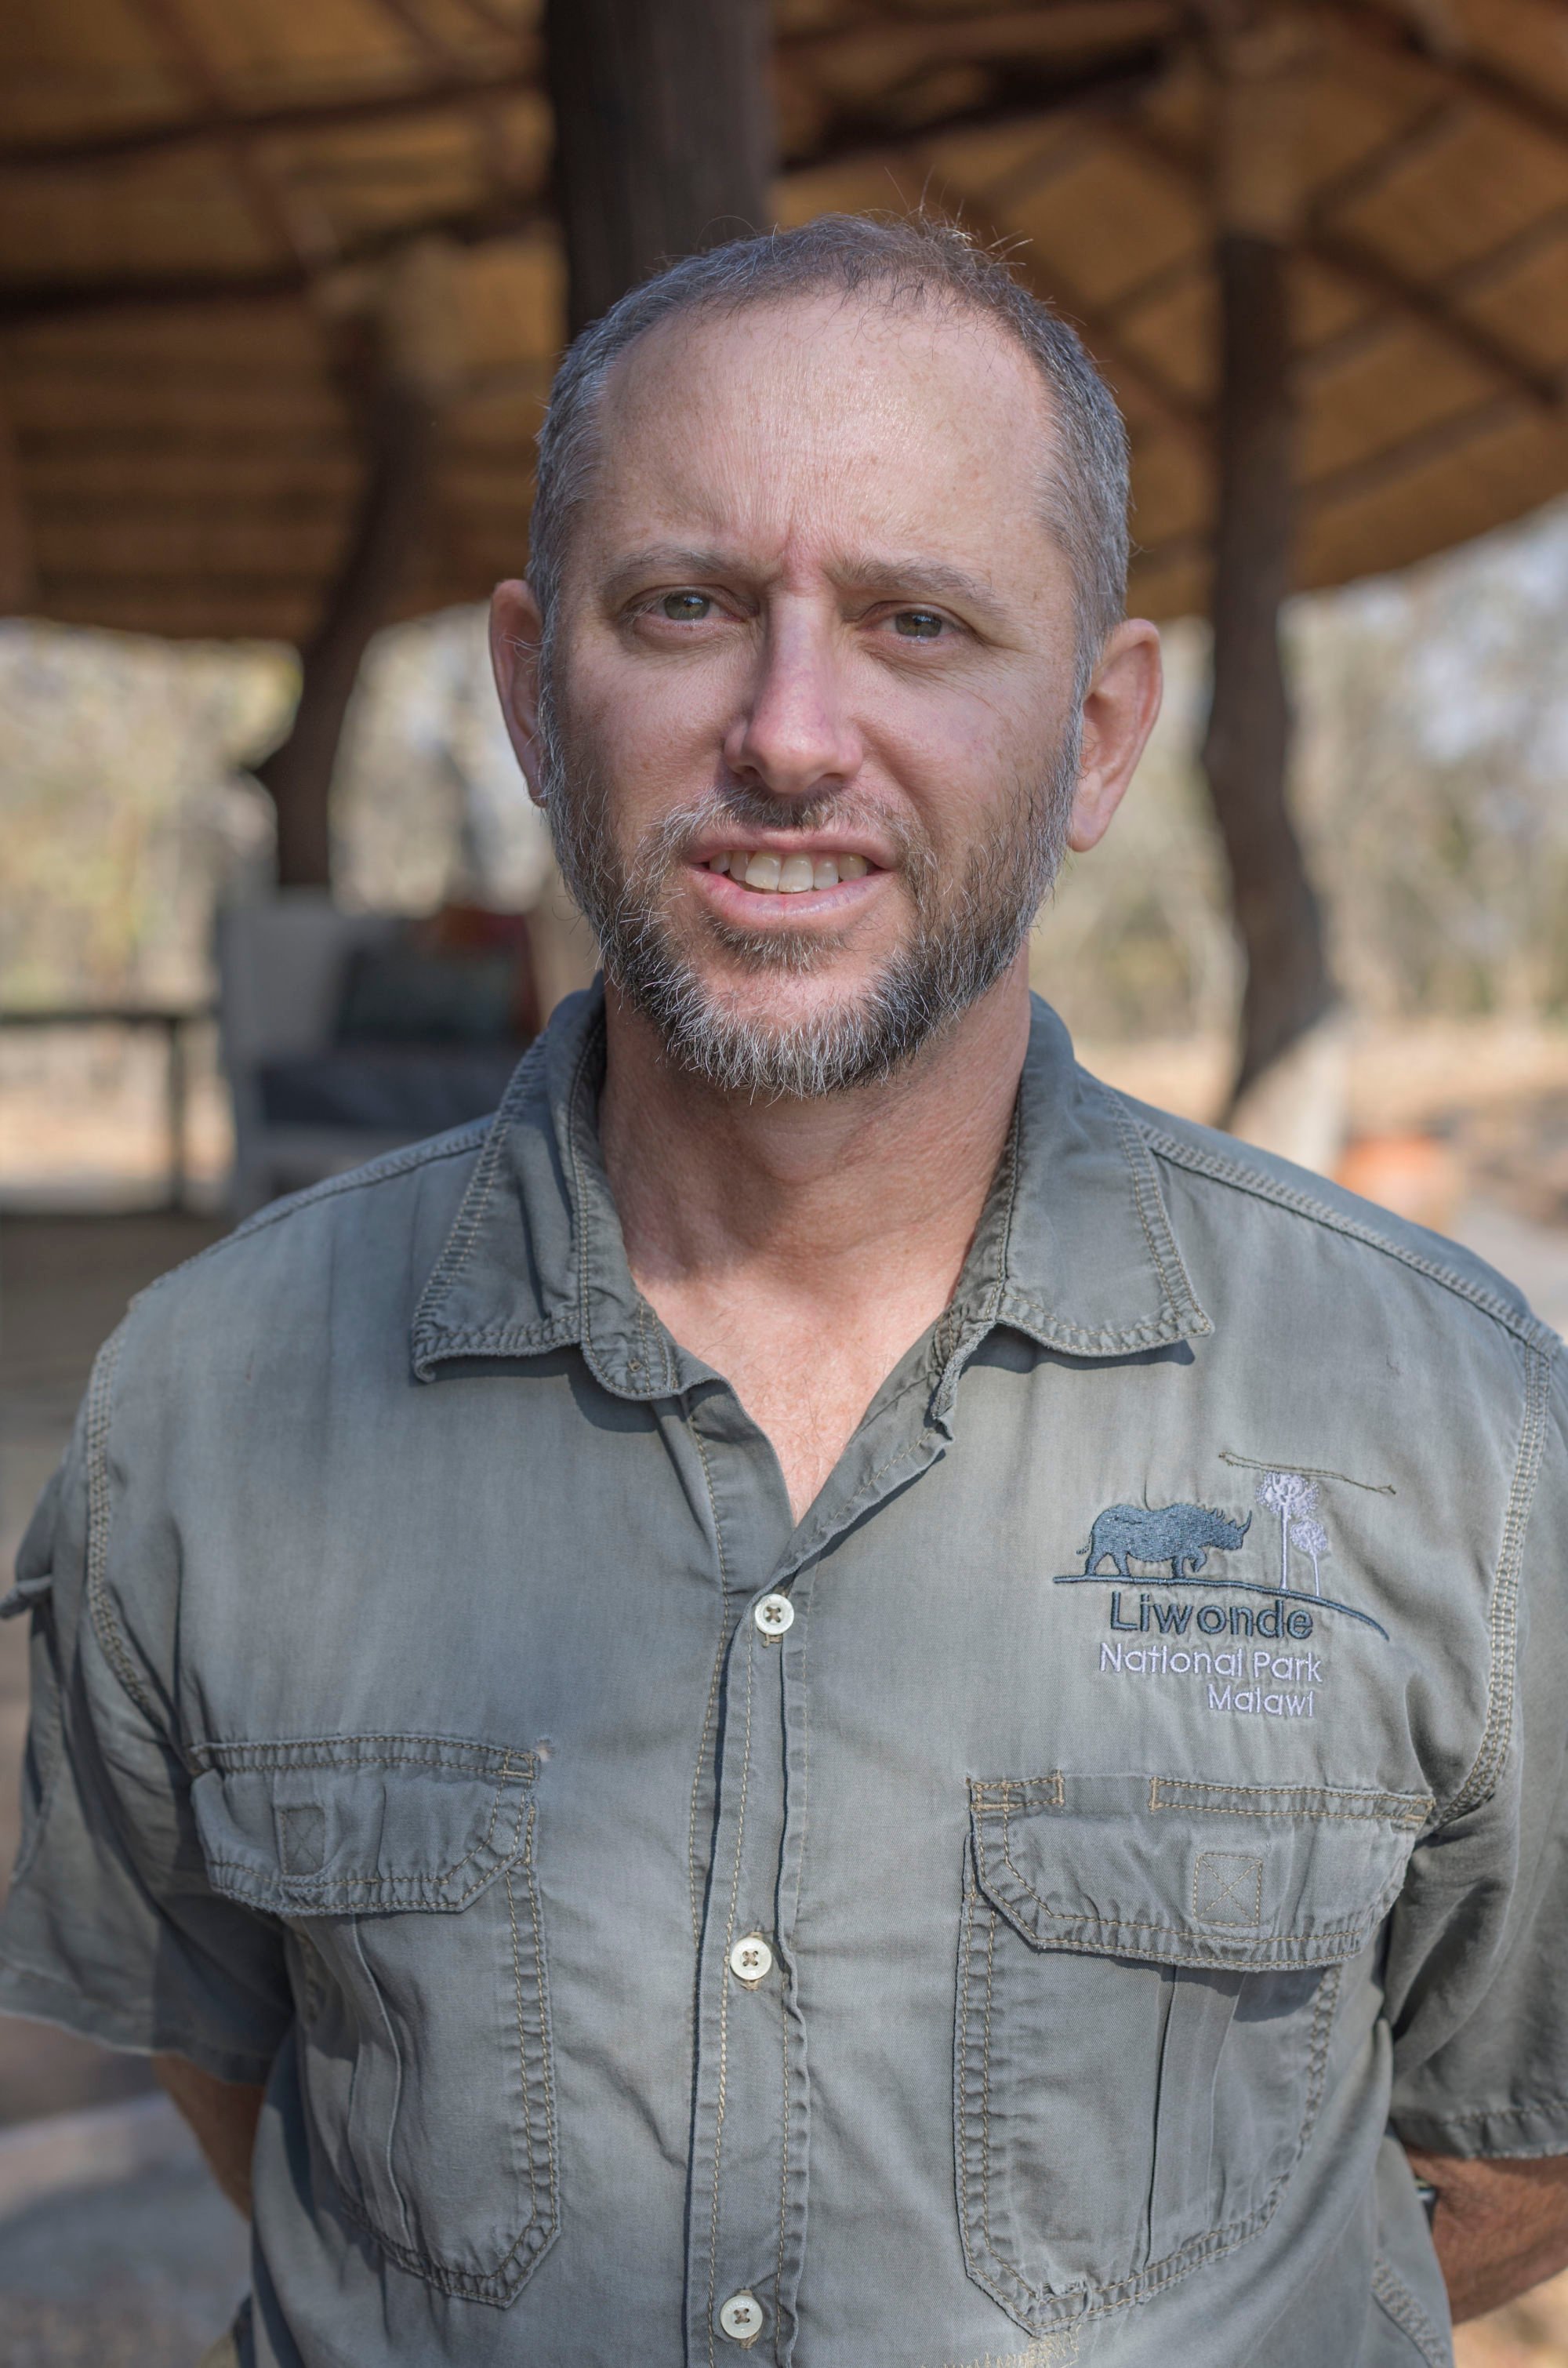 Lawrence Munro, operations manager at Malawi’s Liwonde National Park. Photo: Daniel Allen